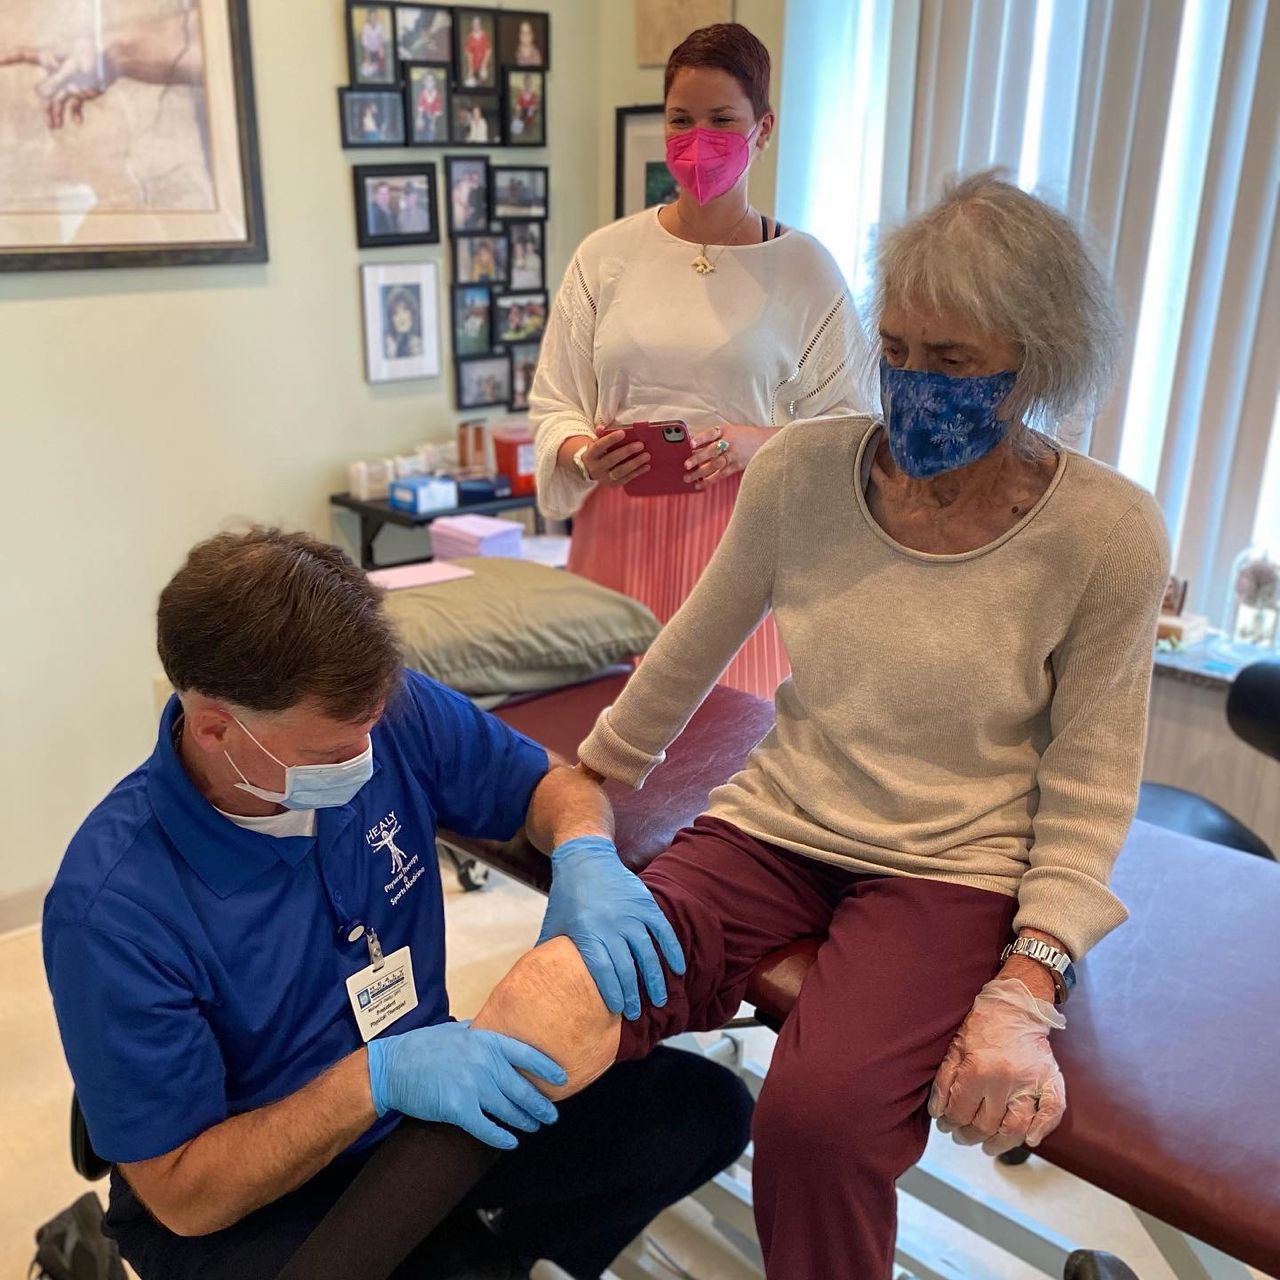 Three people in a physical therapy office. A woman with grey hair and a blue face mask sits on a treatment bench while a man with a blue shirt and a stethoscope around his neck treats her knee. In the background is a woman with short brown hair and a white shirt and pink skirt taking photos.